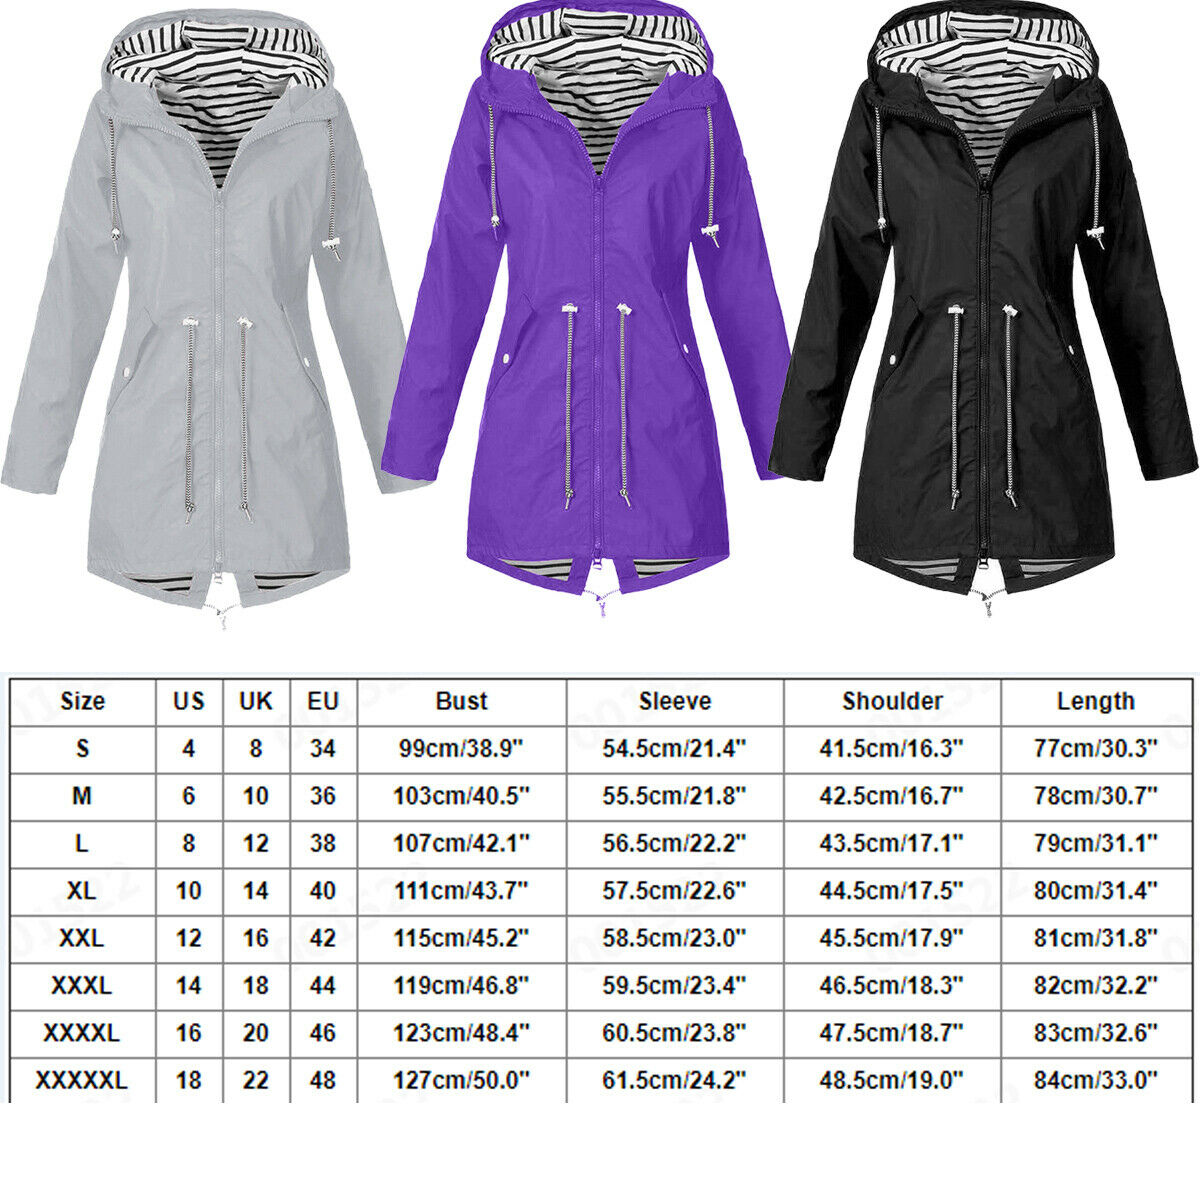 Emmababy Womens Waterproof Jackets with Hood Plus Size Long Raincoats Quick Dry Outdoor Coat - image 3 of 3